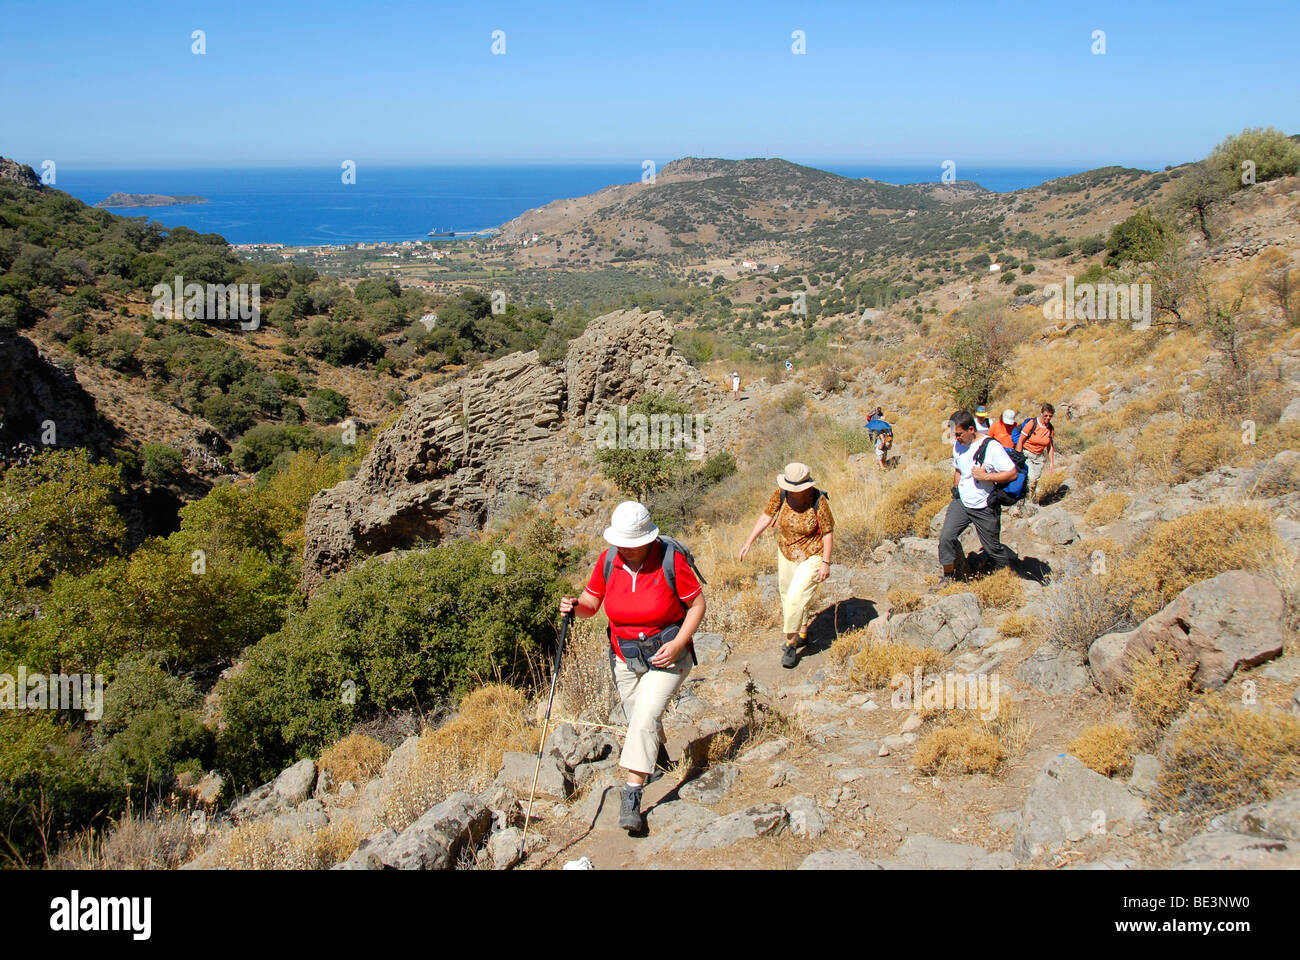 Group hiking in a Mediterranean landscape, Maquis, Mill Valley at Petra, Lesbos, Aegean Sea, Greece, Europe Stock Photo